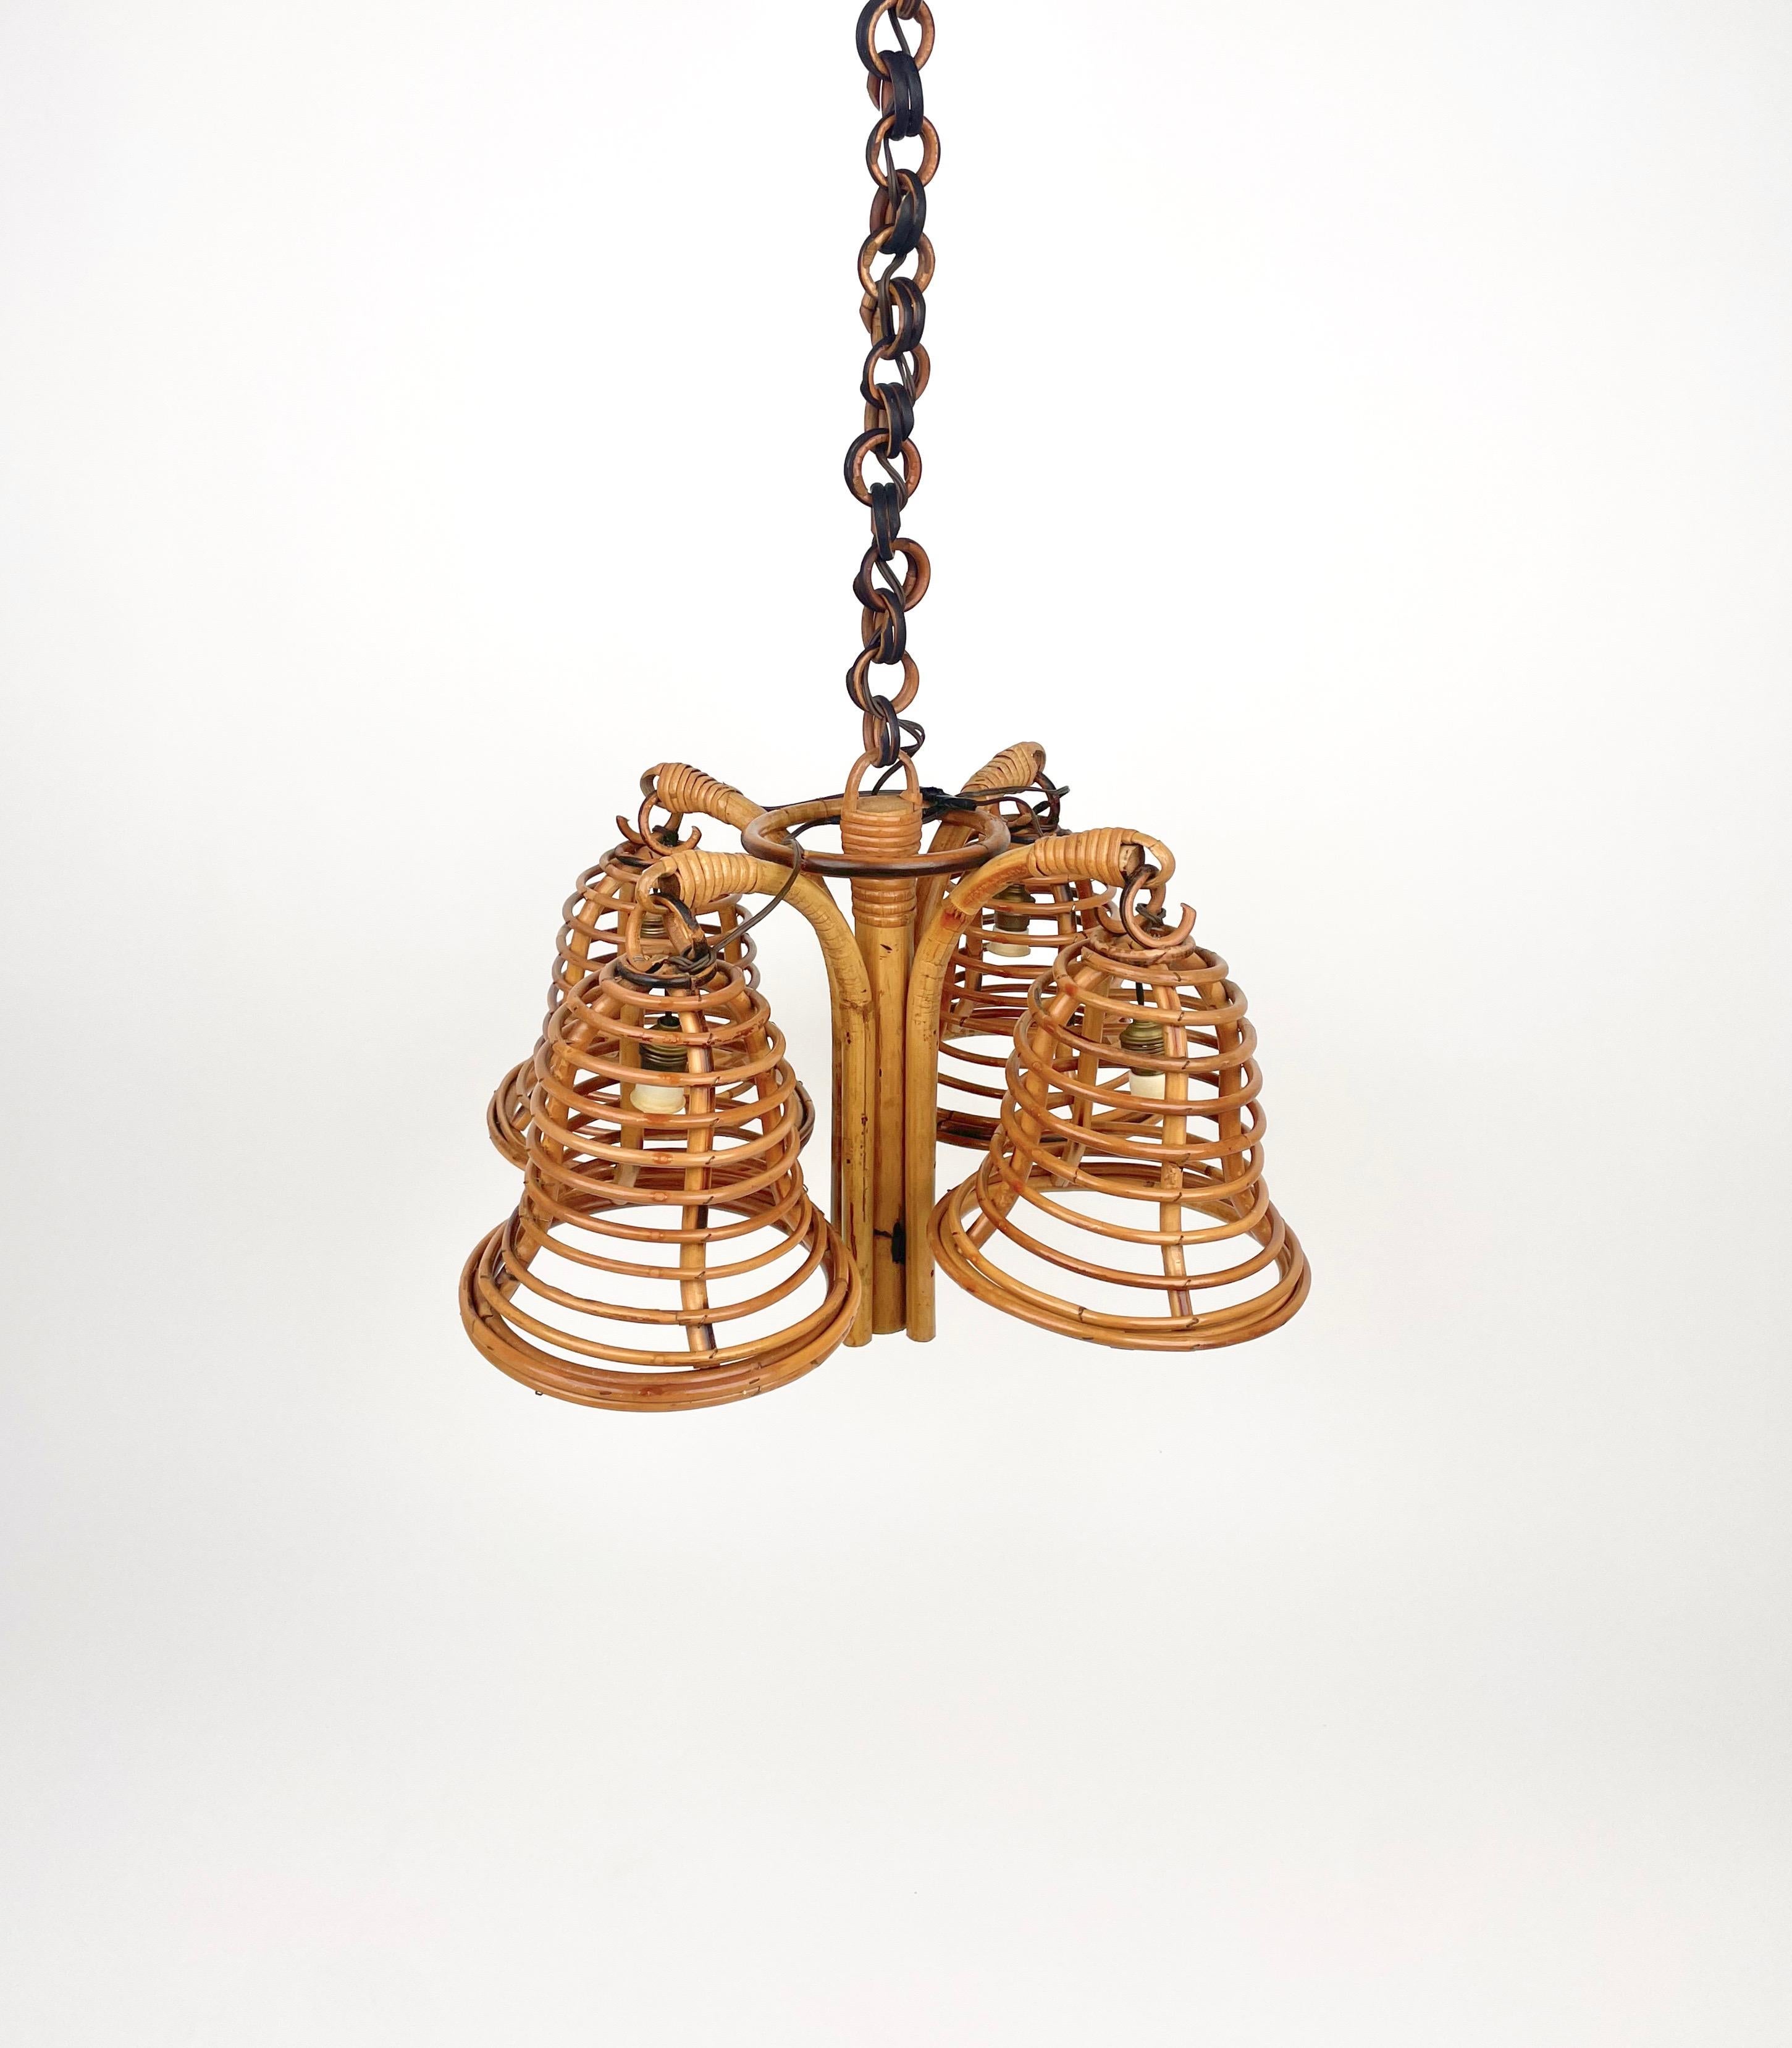 Chandelier pendant in bamboo and rattan featuring four lights in the style of French designer Louis Sognot.

Made in Italy in the 1960s.


Louis Sognot was a French designer best known for his elegant furniture made from a combination of rattan